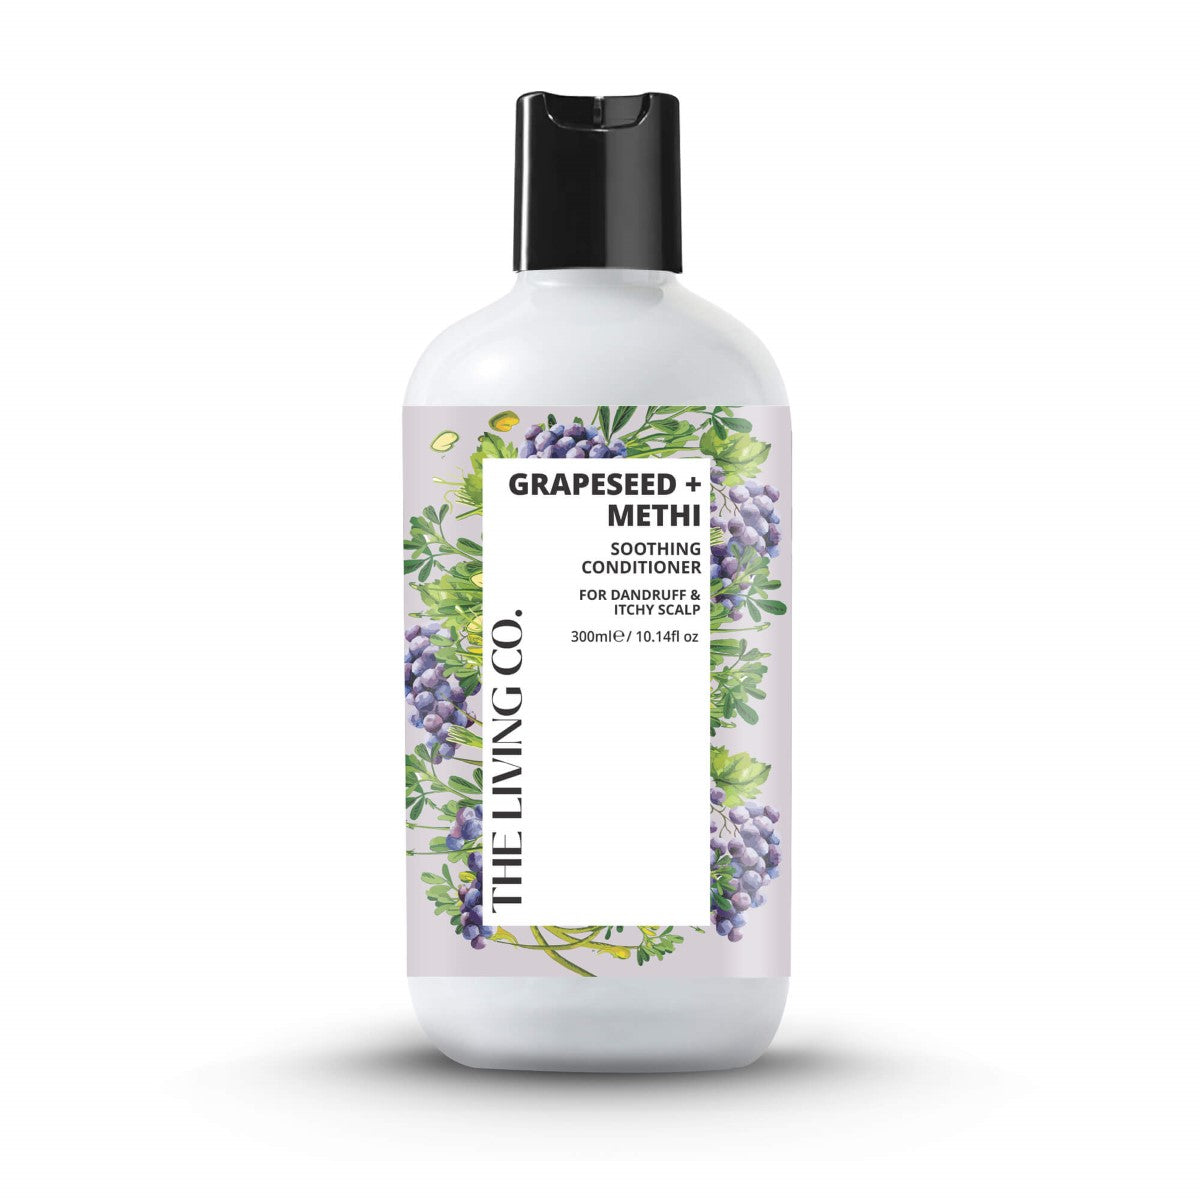 Soothing Conditioner With Grapeseed + Methi